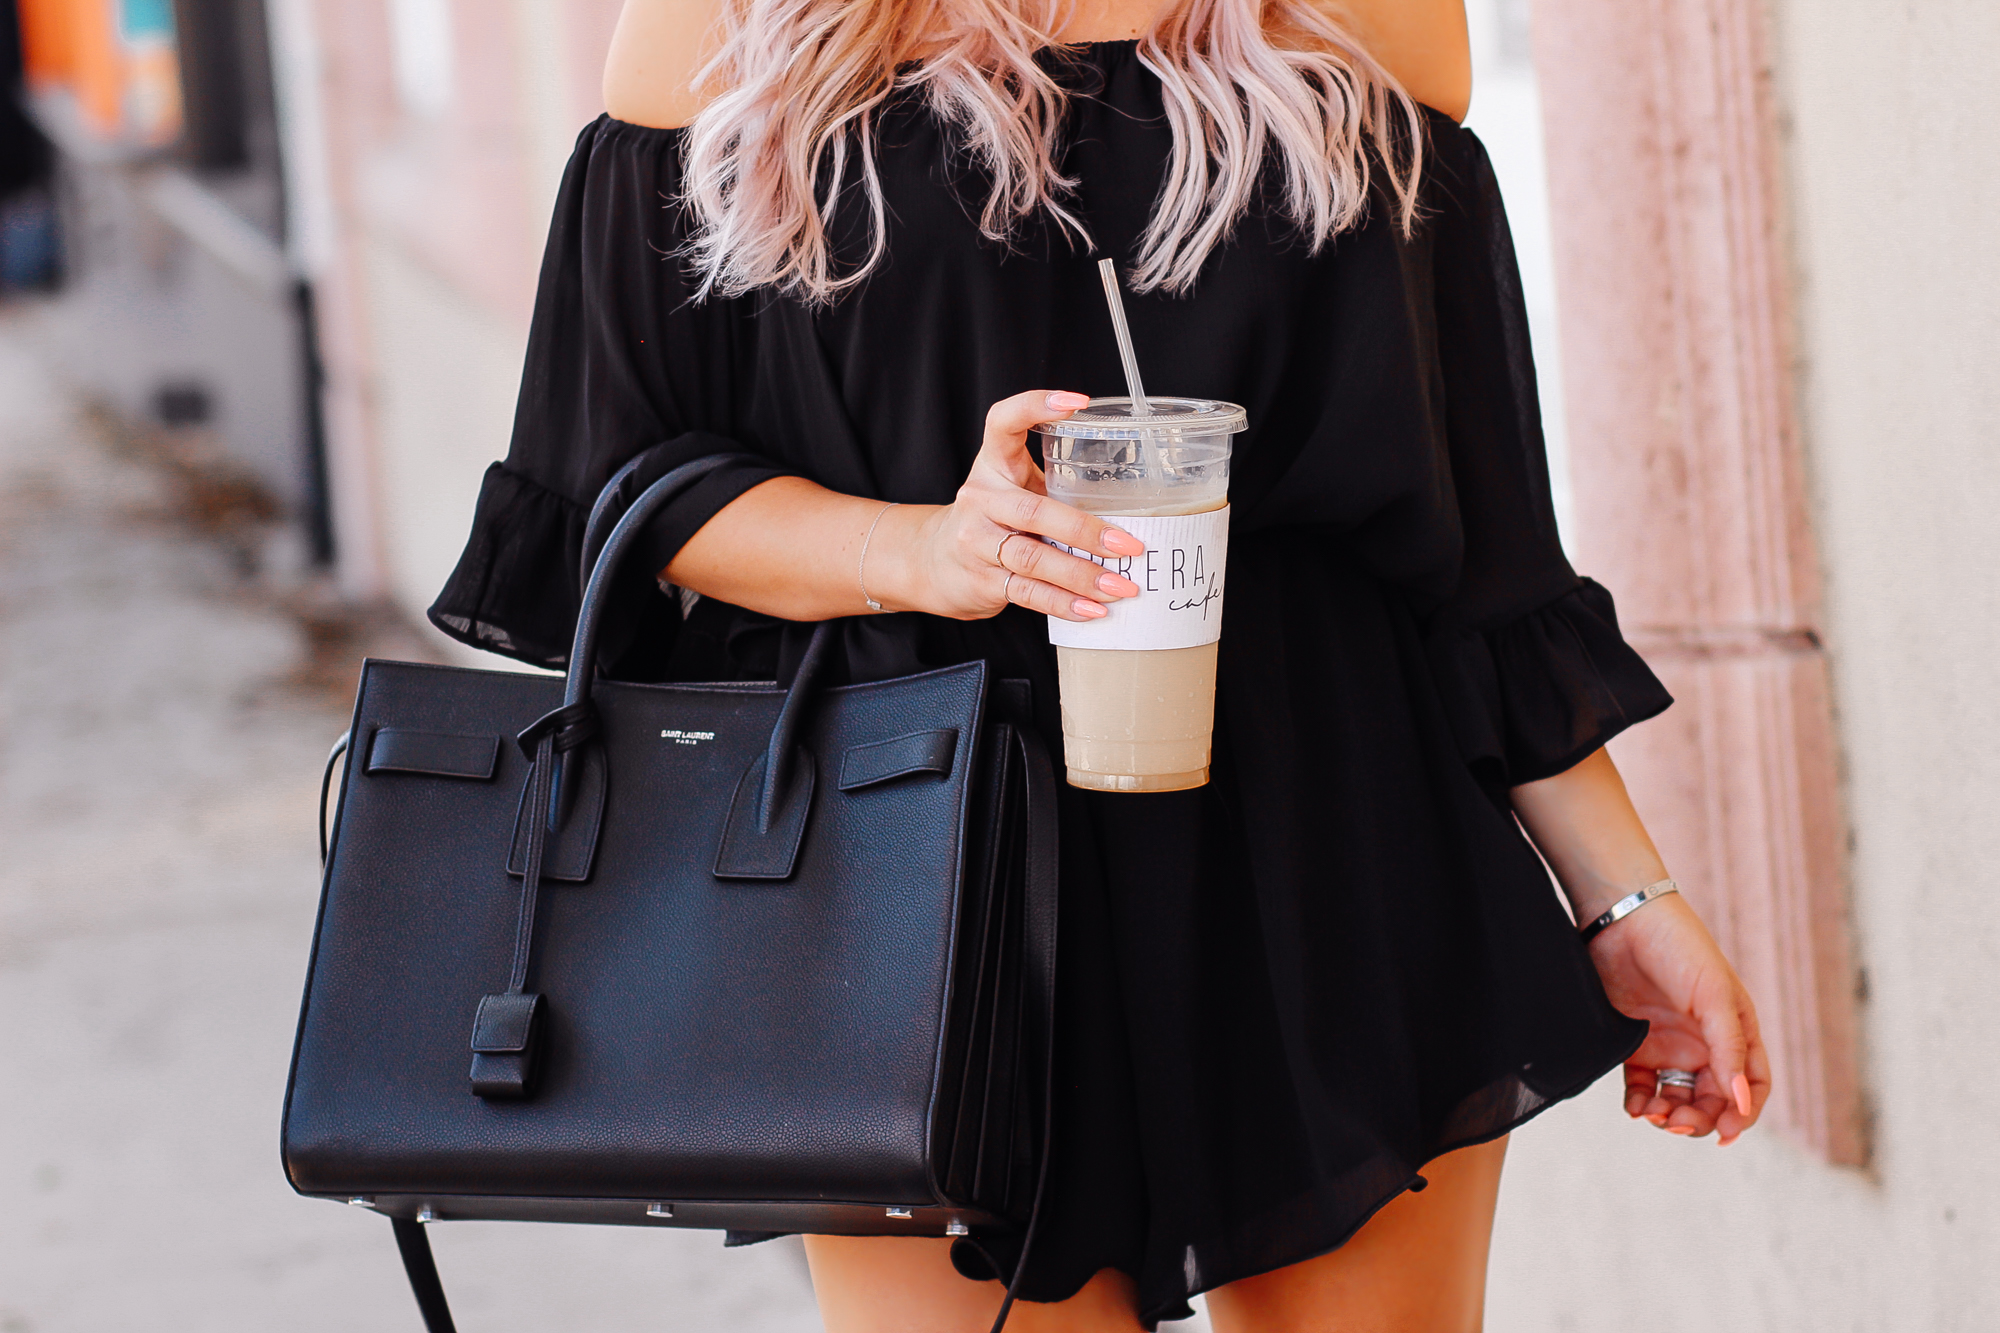 Blondie in the City | Black Airy Chiffon Romper @chicwish | Black YSL Bag | Chic Summer Style